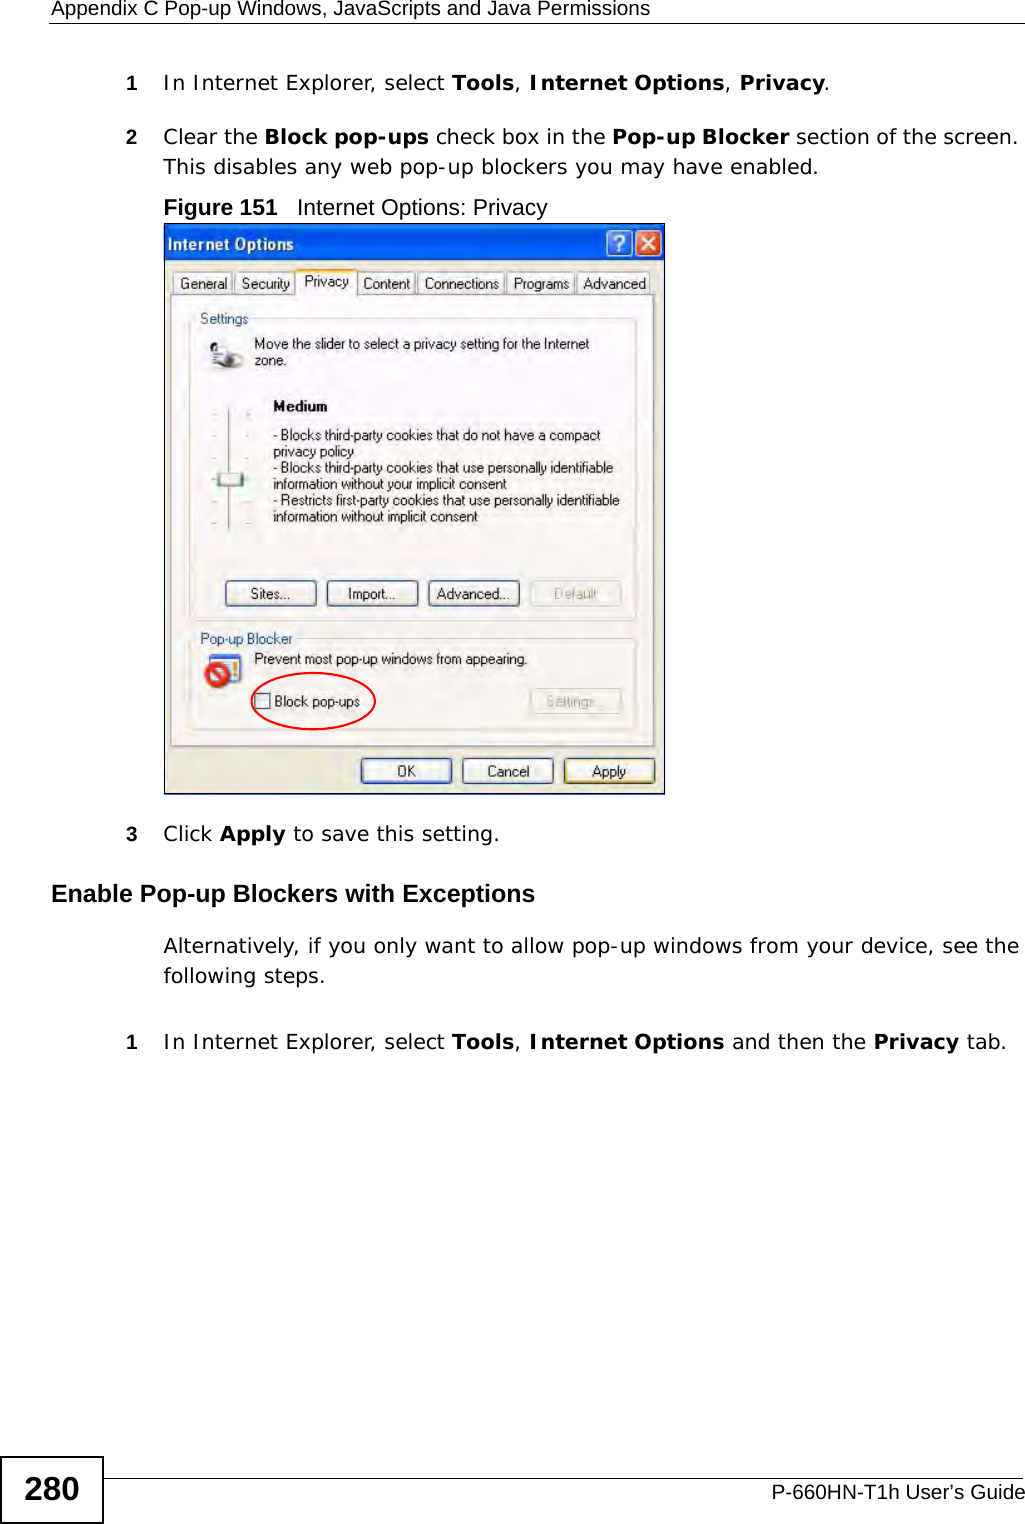 Appendix C Pop-up Windows, JavaScripts and Java PermissionsP-660HN-T1h User’s Guide2801In Internet Explorer, select Tools, Internet Options, Privacy.2Clear the Block pop-ups check box in the Pop-up Blocker section of the screen. This disables any web pop-up blockers you may have enabled. Figure 151   Internet Options: Privacy3Click Apply to save this setting.Enable Pop-up Blockers with ExceptionsAlternatively, if you only want to allow pop-up windows from your device, see the following steps.1In Internet Explorer, select Tools, Internet Options and then the Privacy tab. 